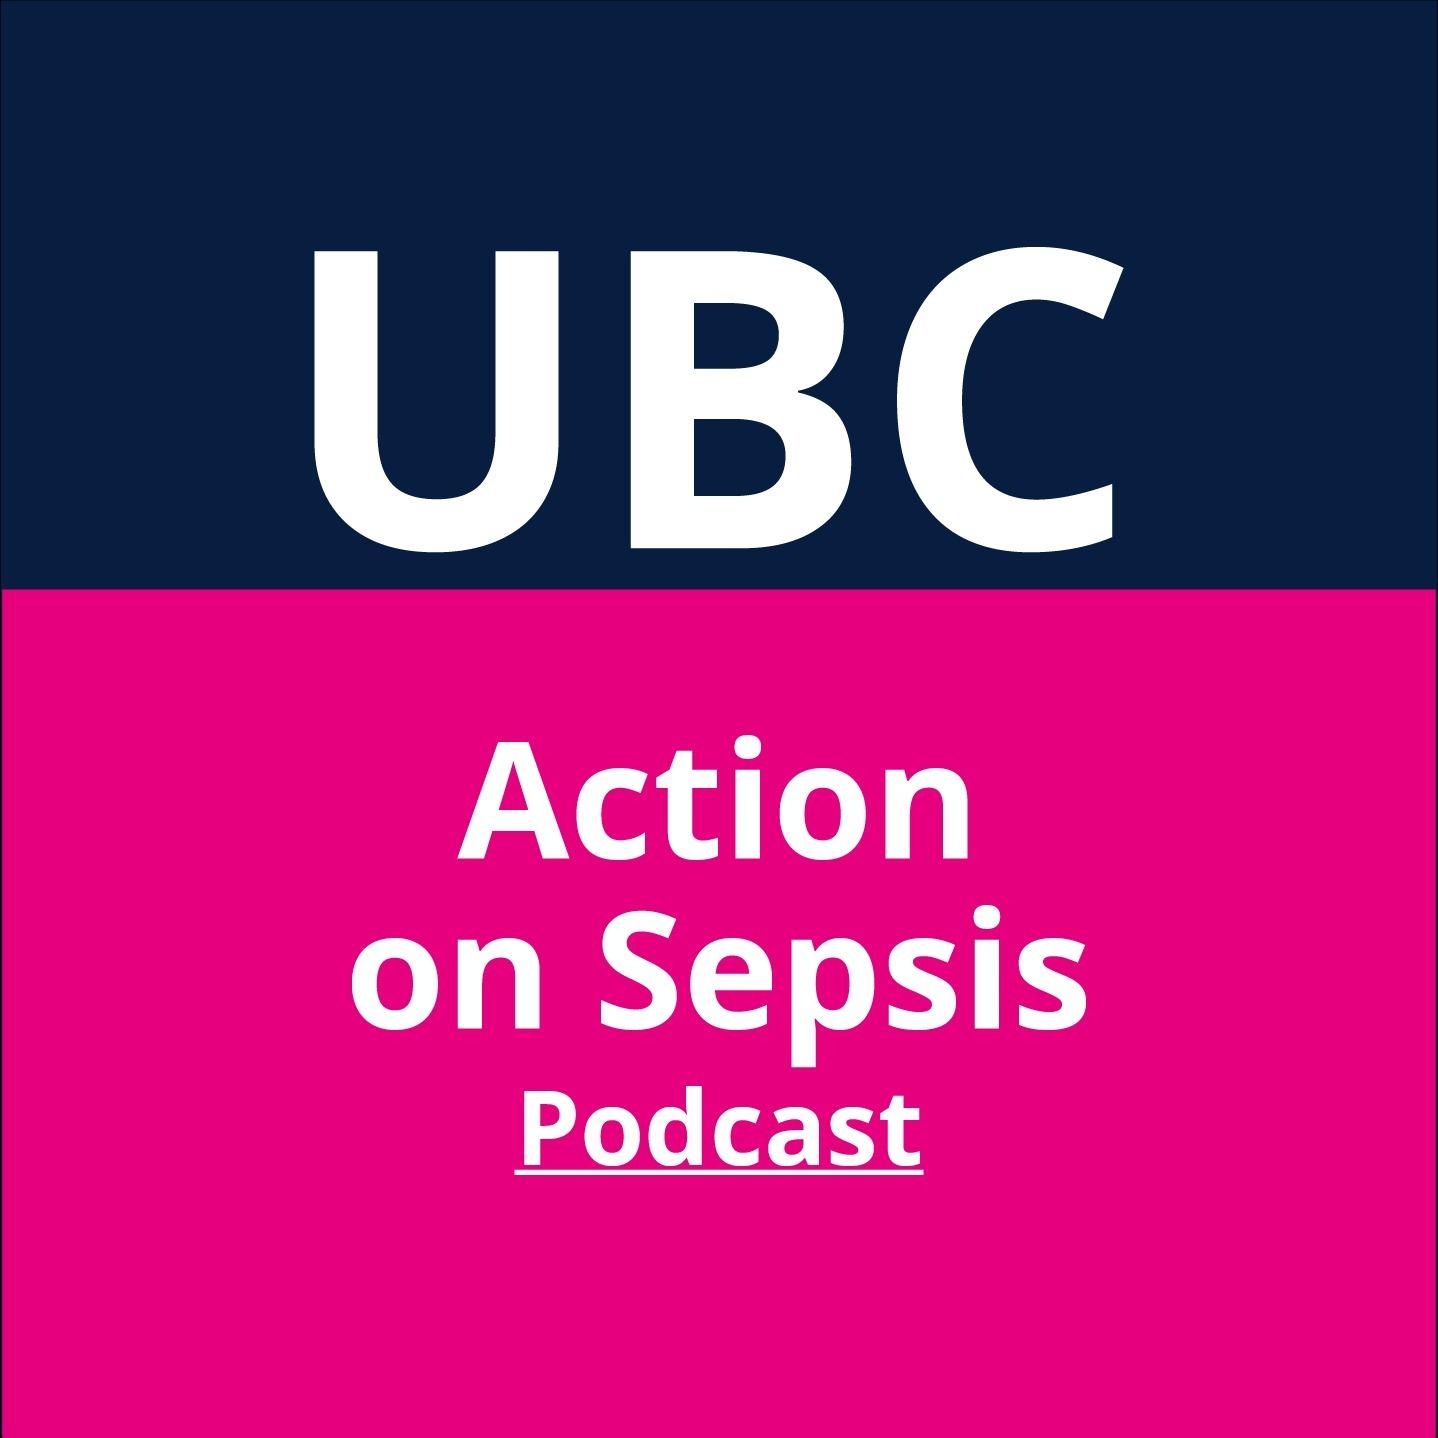 Action on Sepsis Podcast